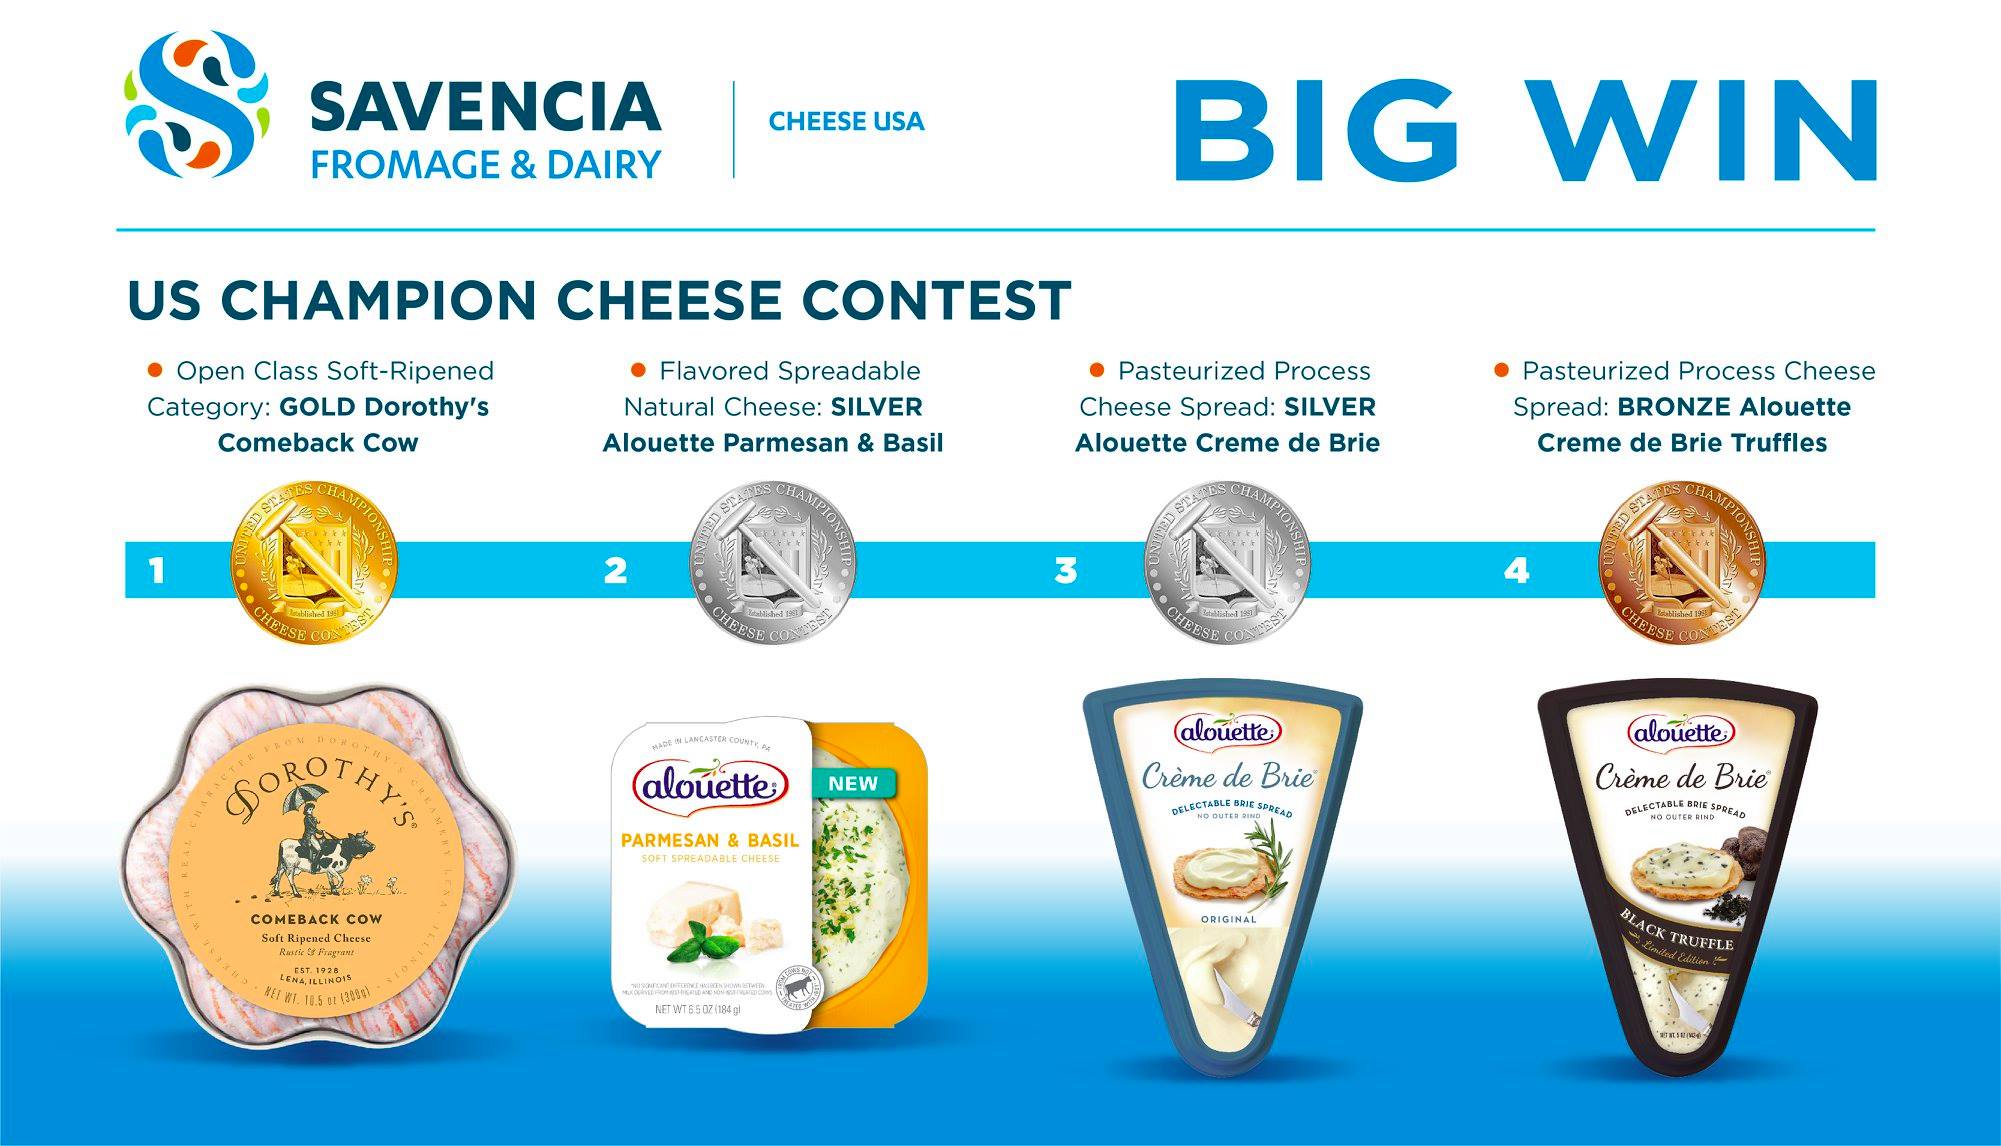 Multiple big wins at US Champion Cheese Contest in Madison, WI for Savencia Cheese USA with a Record-Breaking 2,550 Competitors in Close Contest